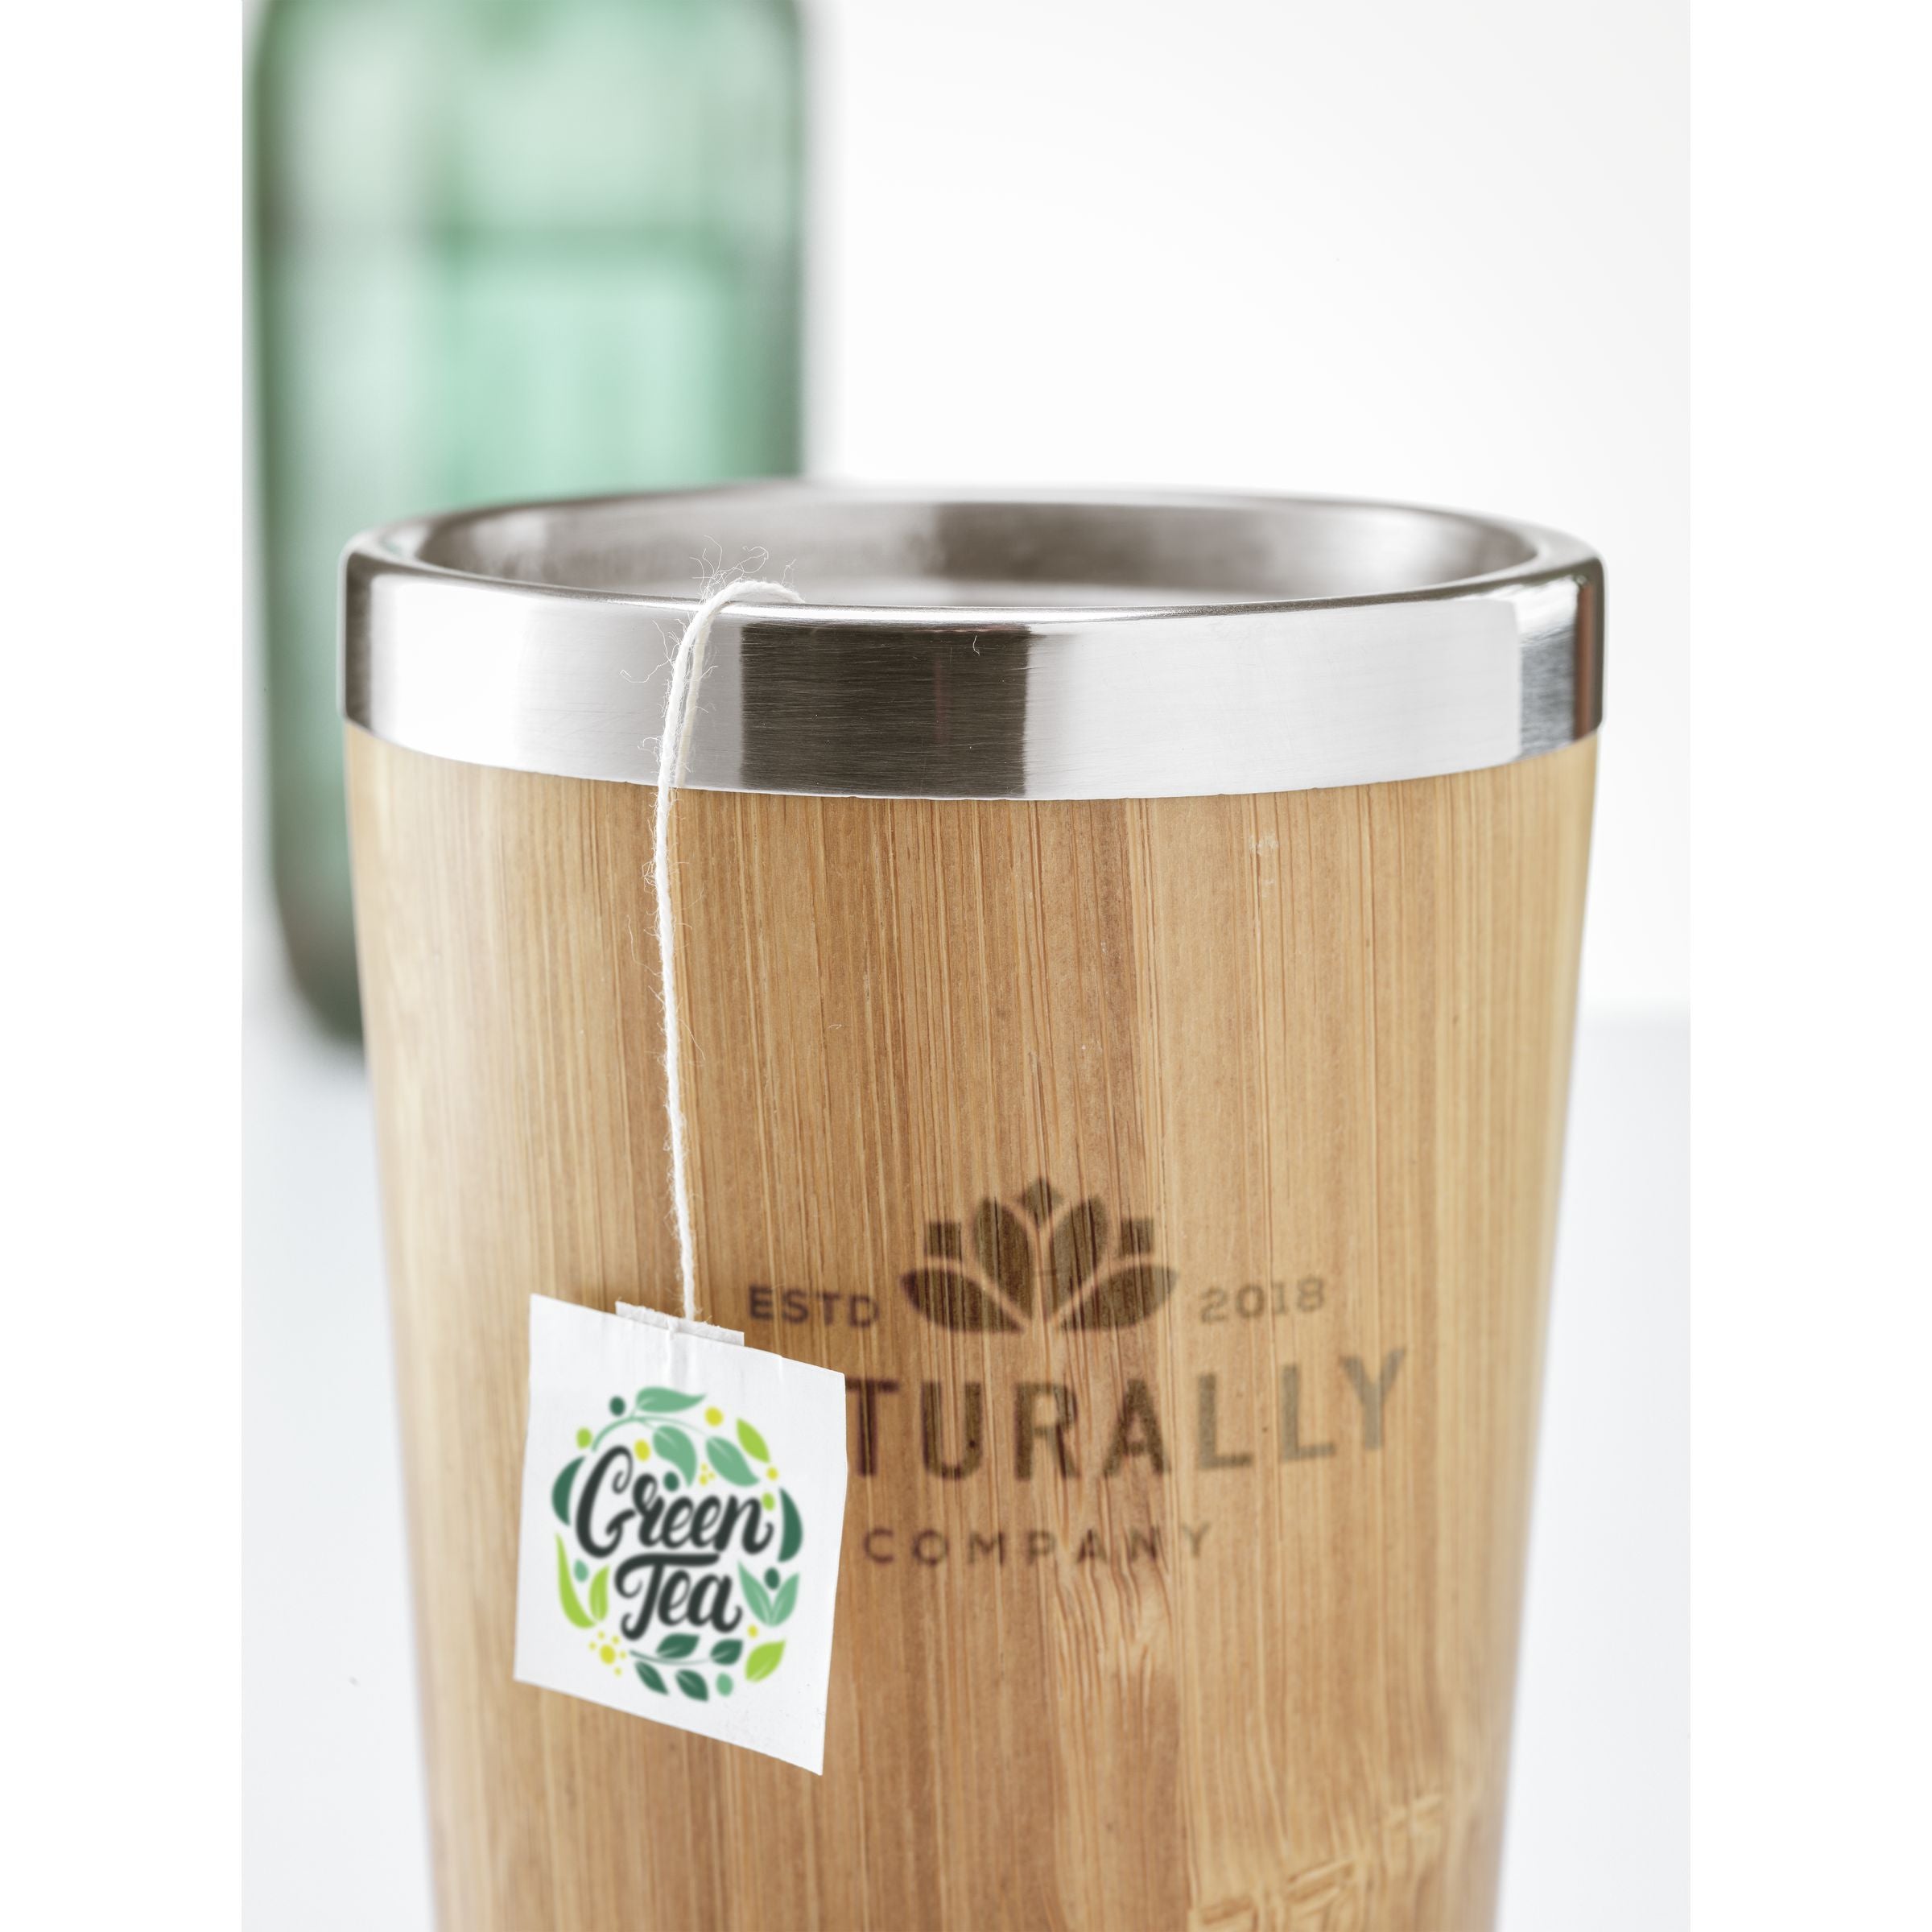 Tokyo 450 ml Bamboo Thermal Cup